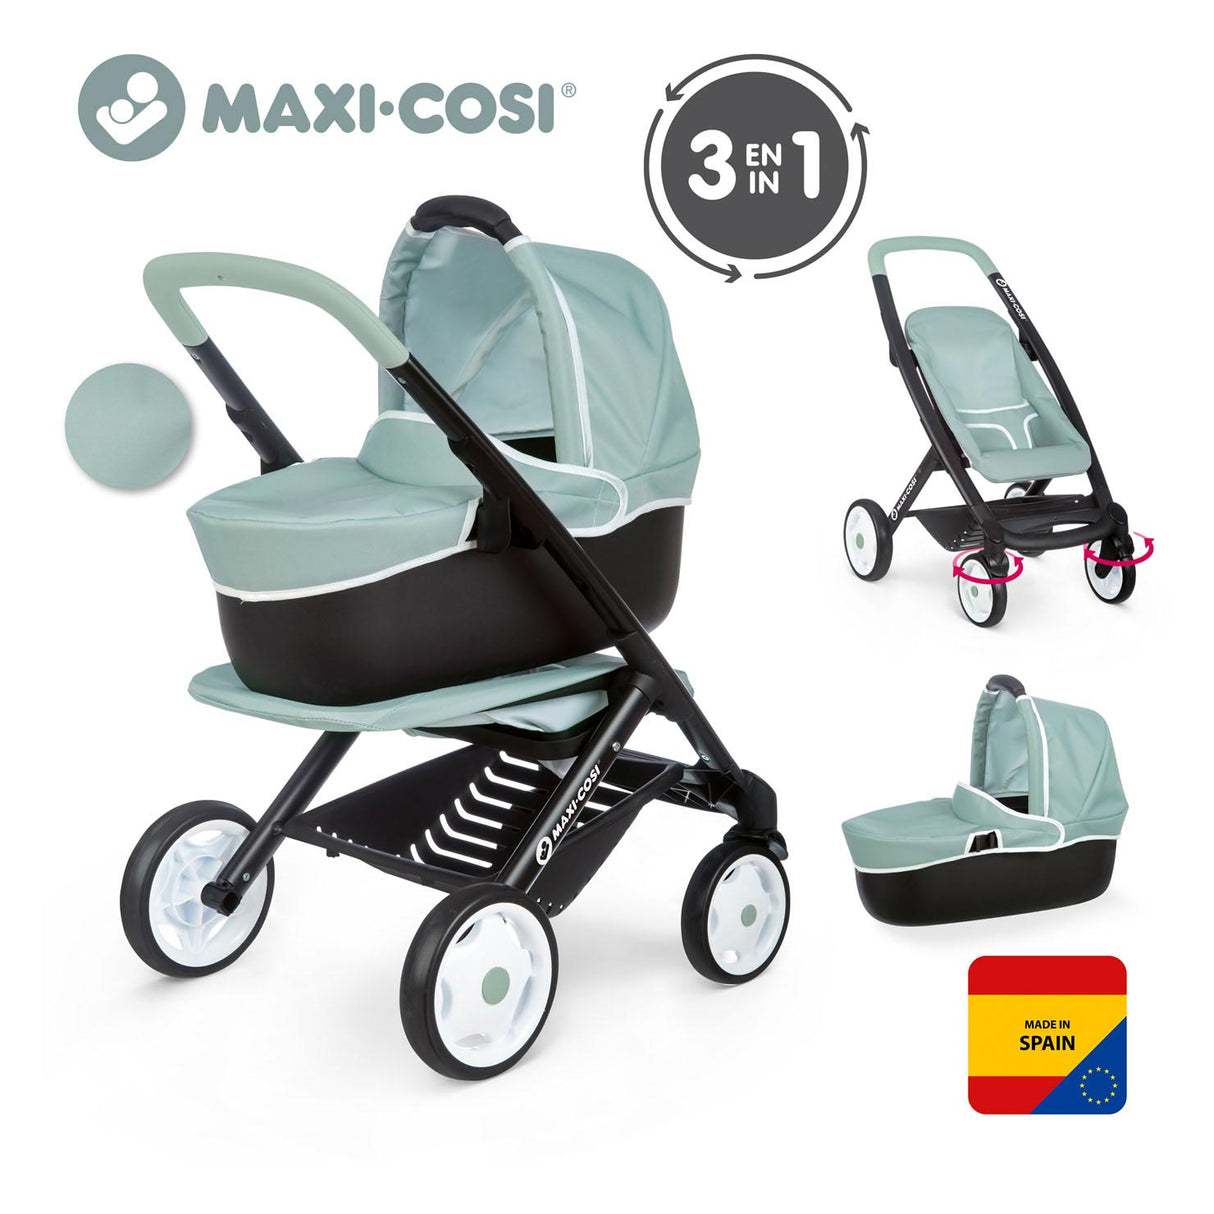 Smoby Maxi-Cosi Poppenwagen Sage 3in1